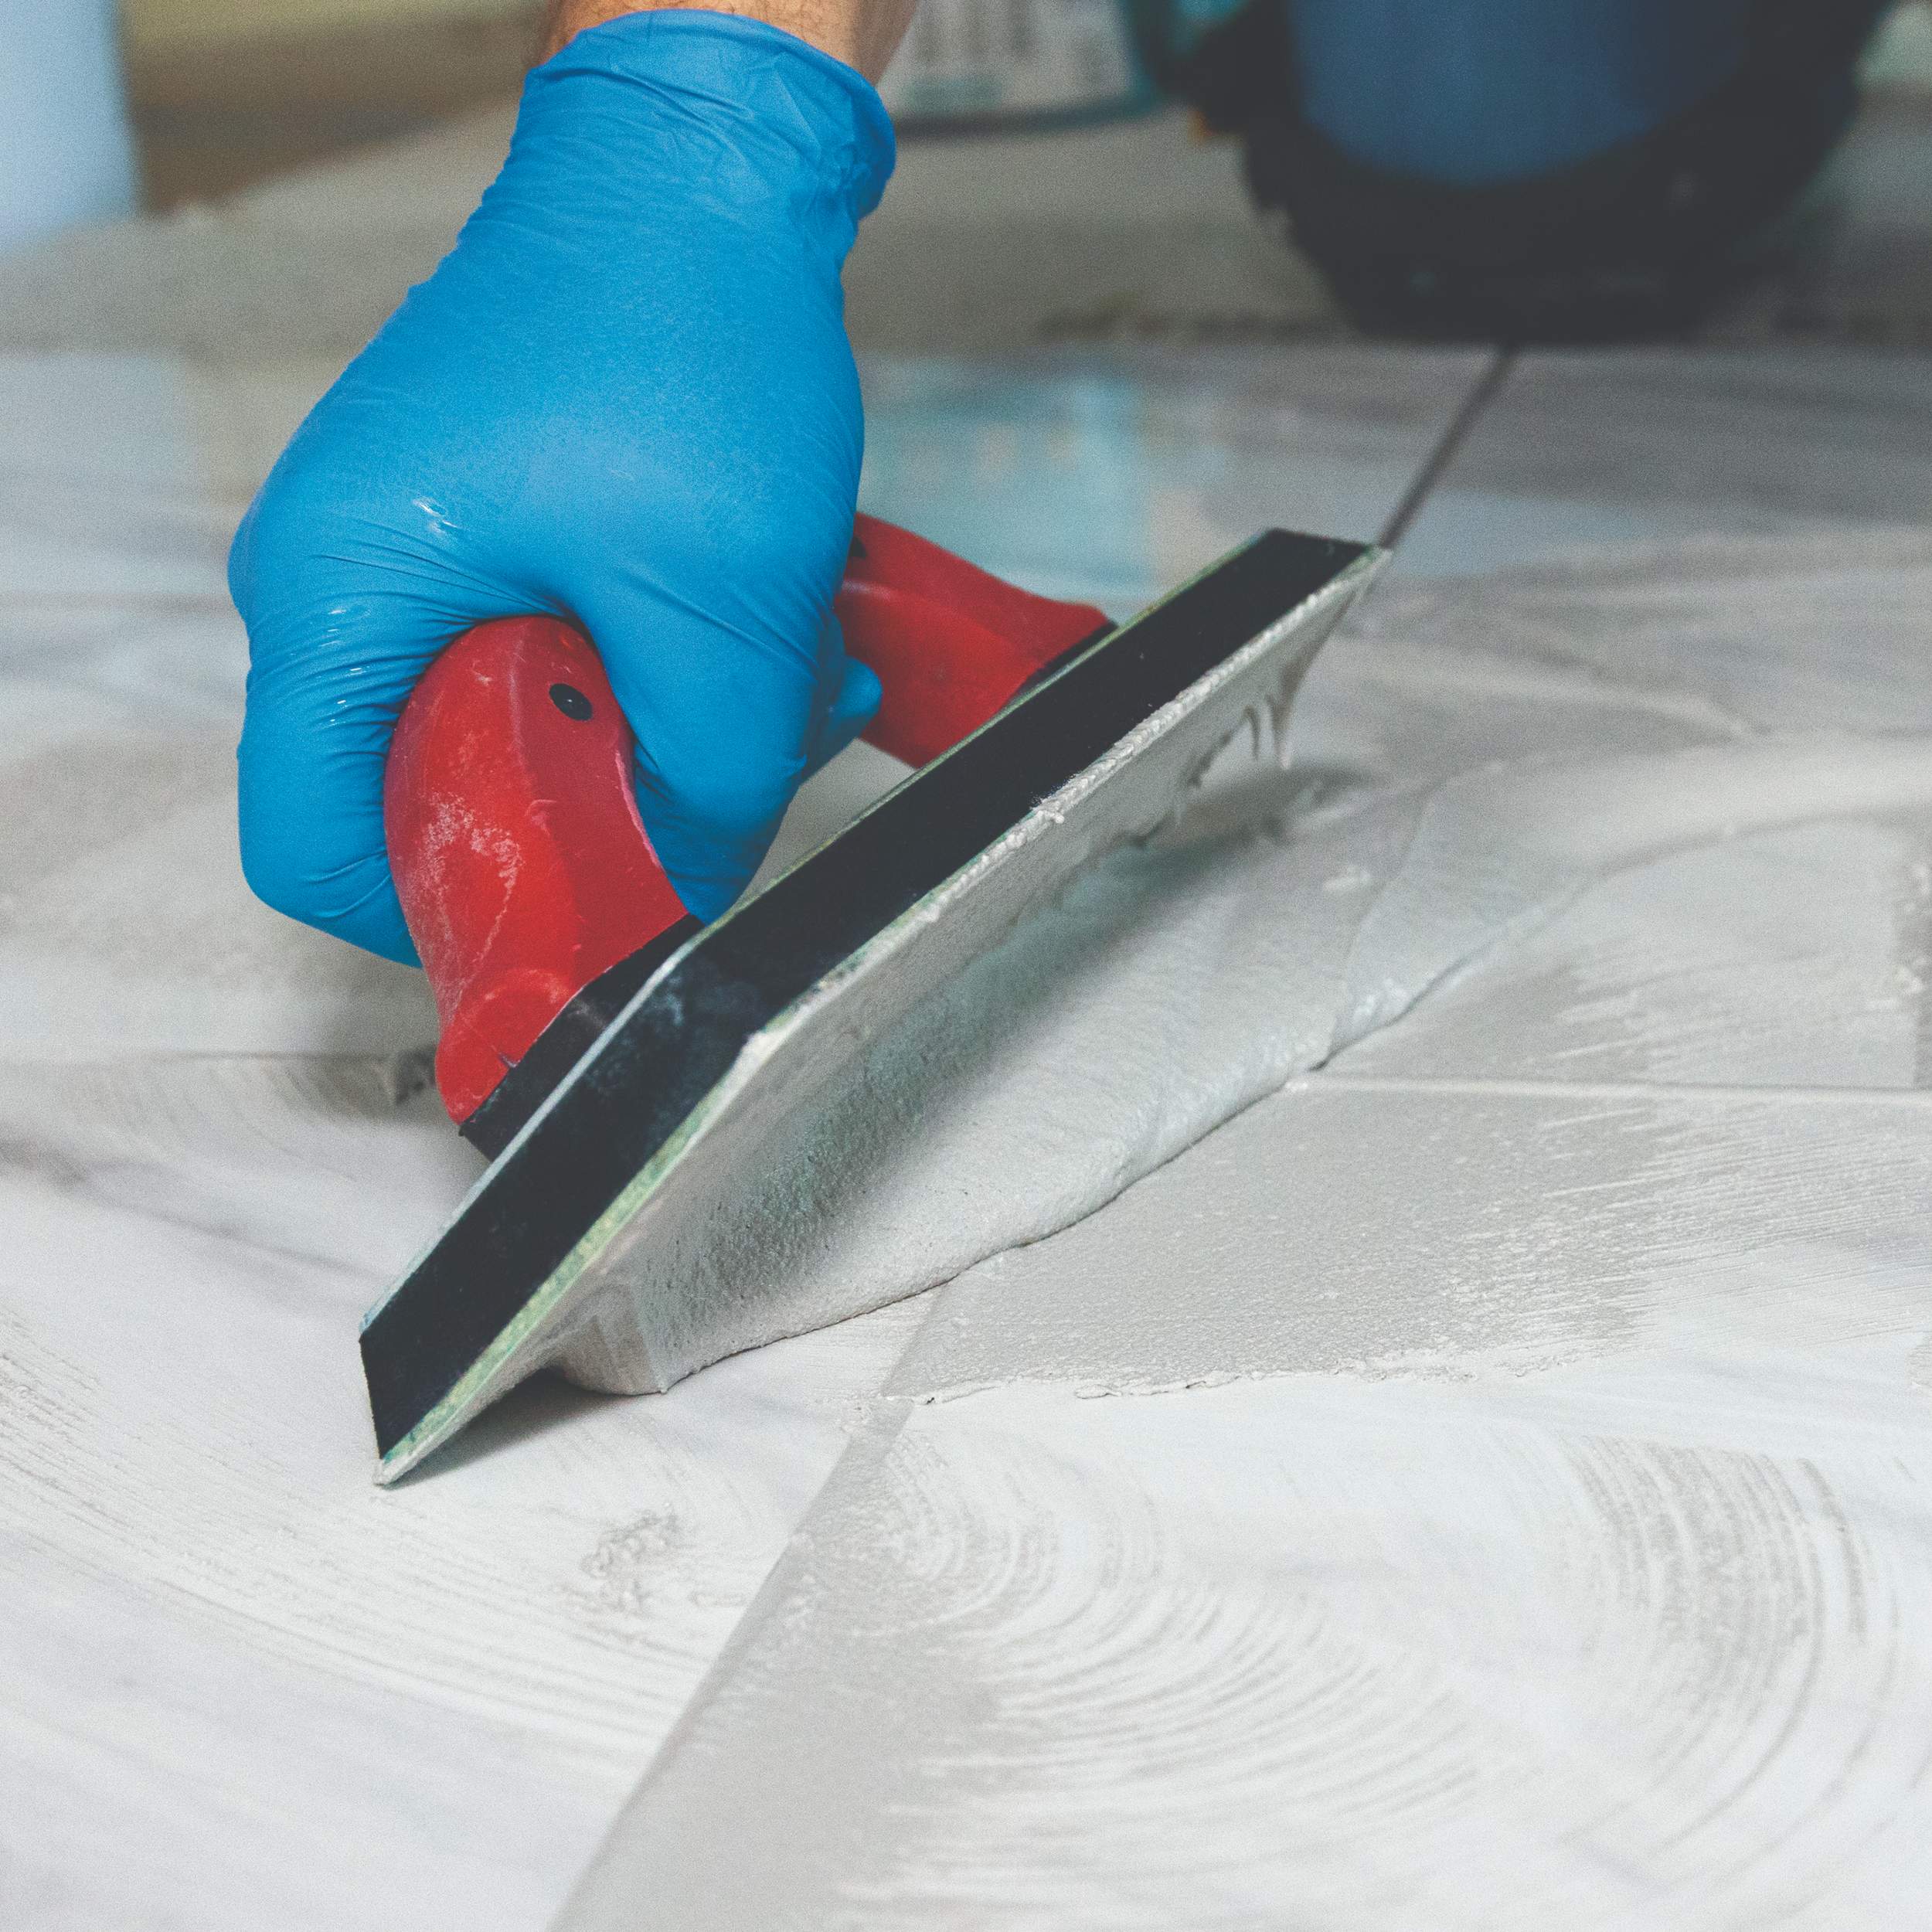 PERMACOLOR® Grout